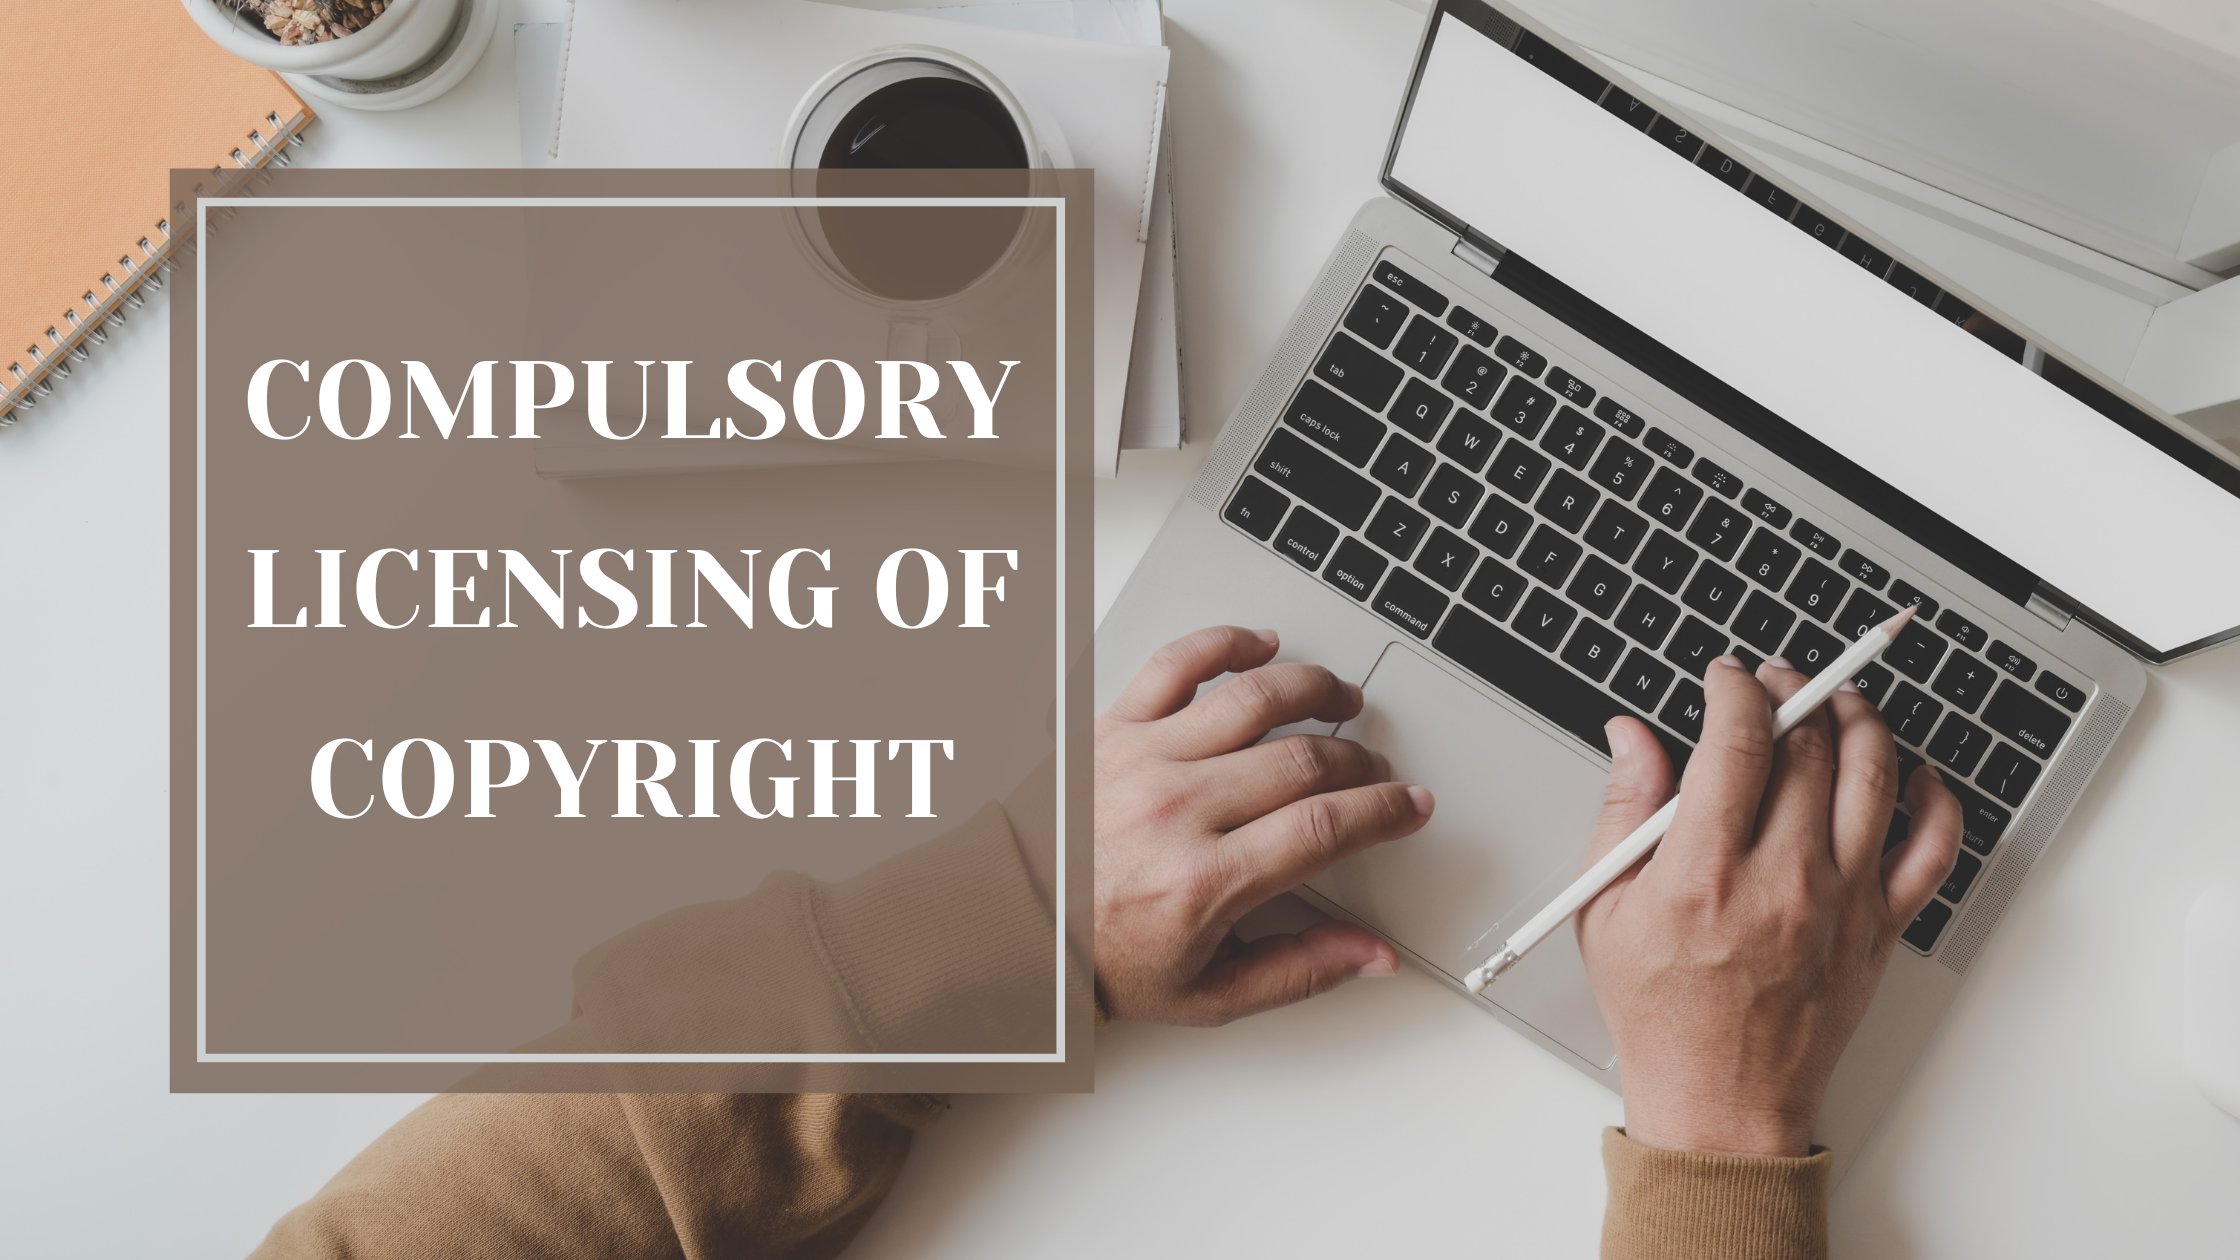 COMPULSORY LICENSING OF COPYRIGHT